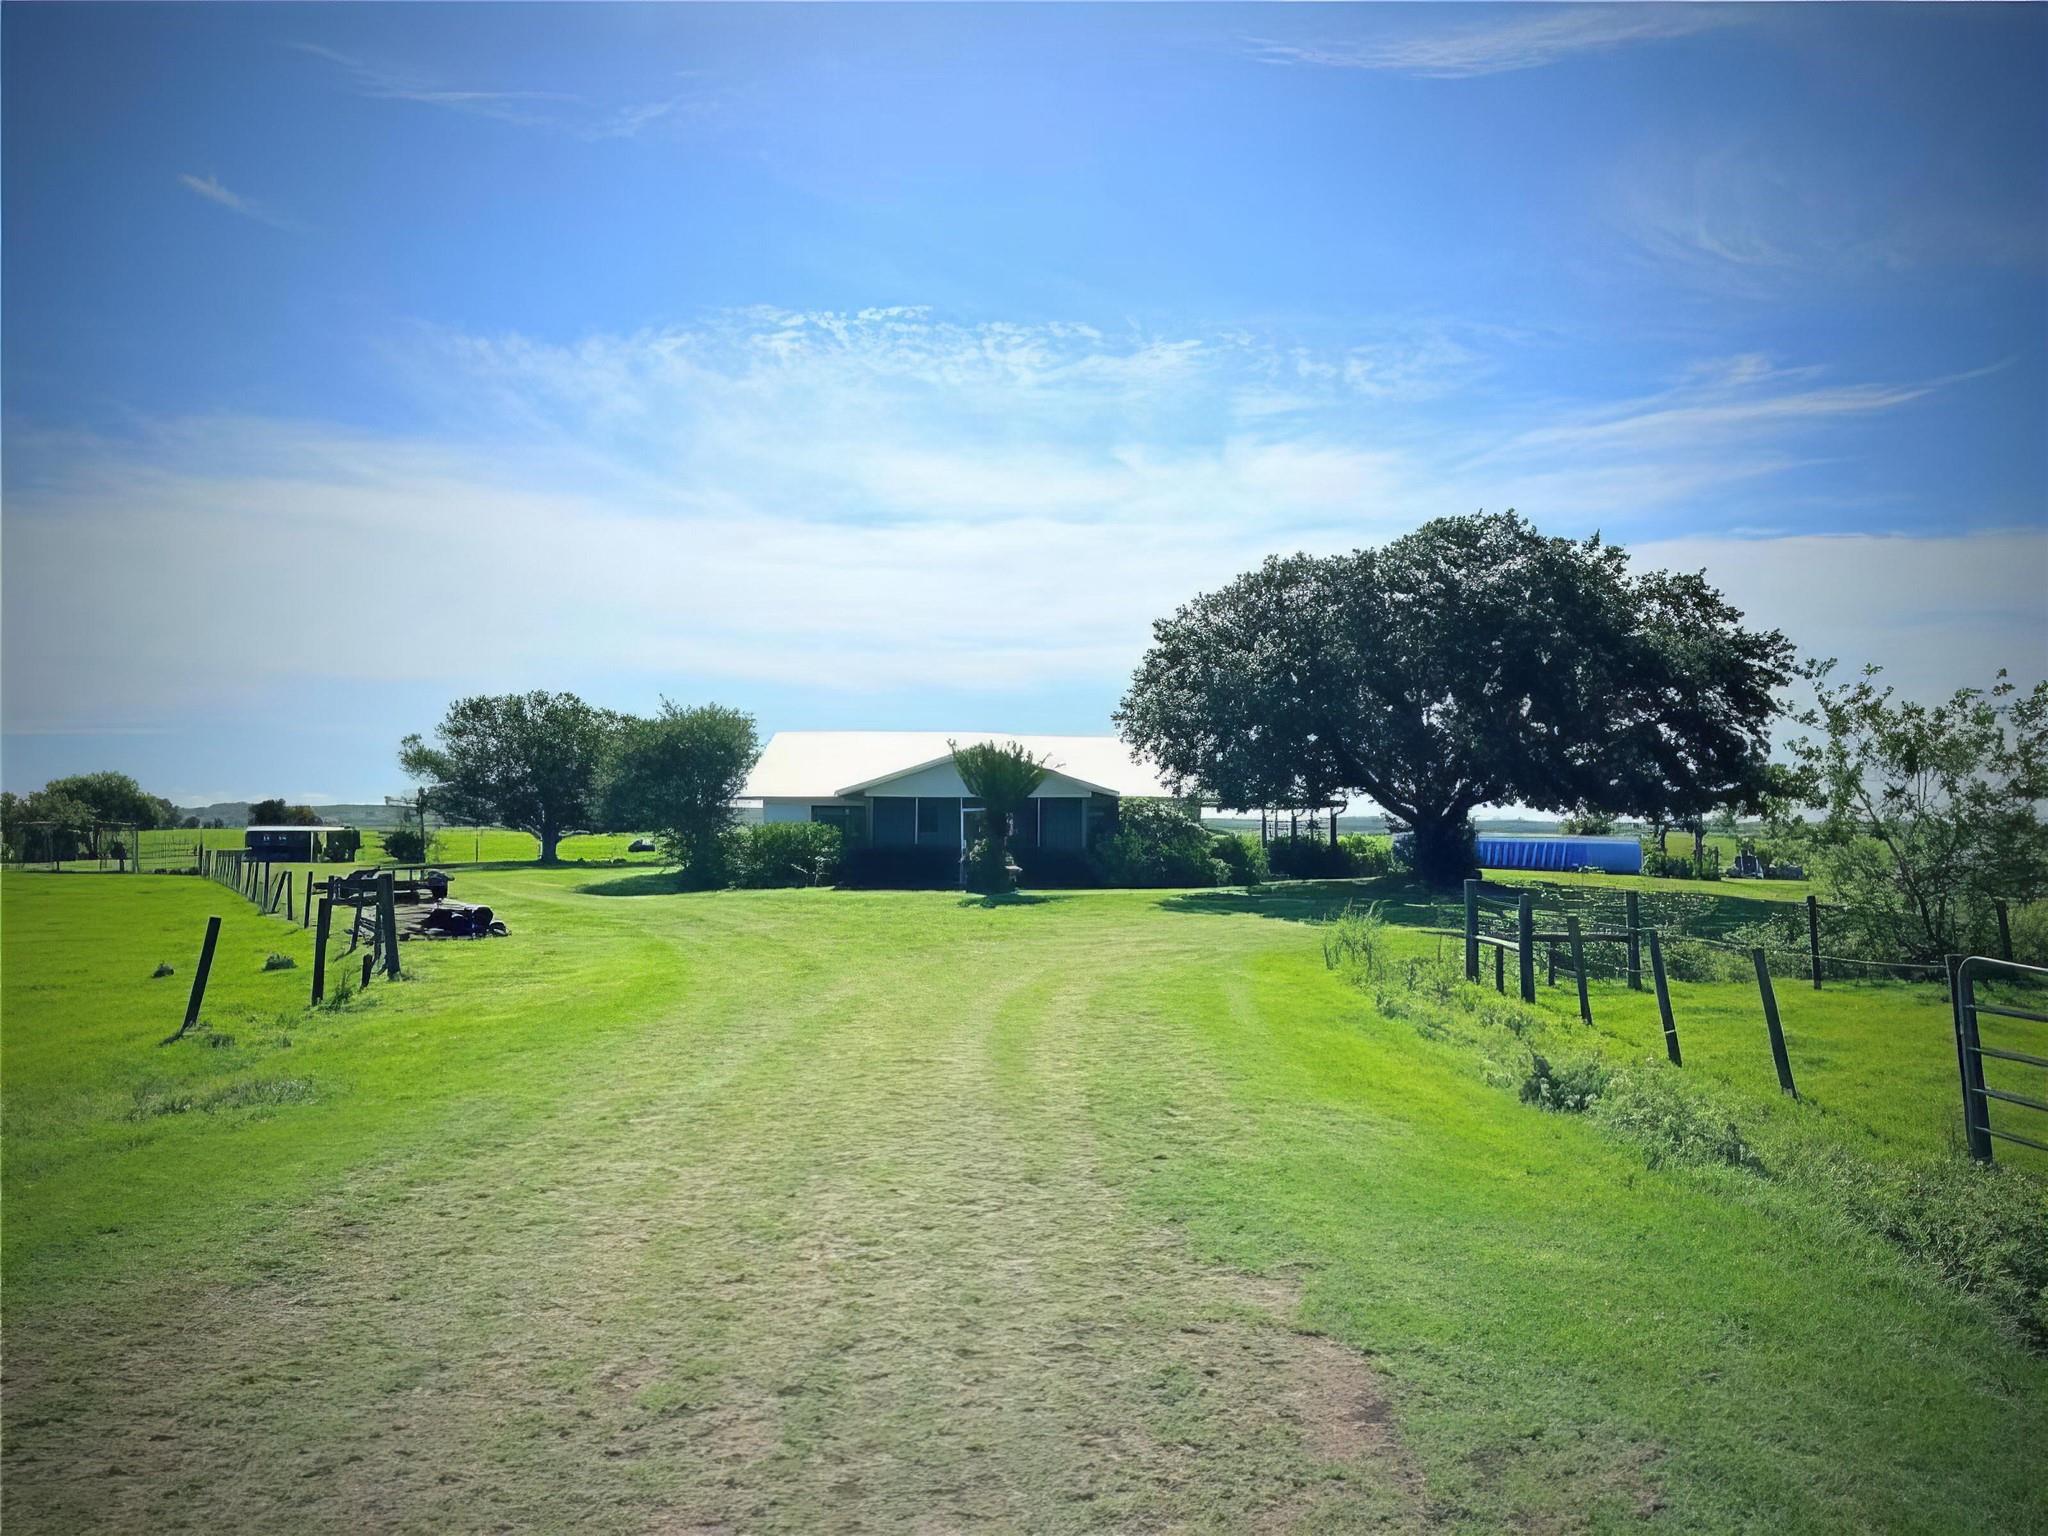 Gorgeous 2 bed, 2 bath home on 20 acres! Includes an above-ground pool, Florida room overlooking the back pasture, barn, and private driveway. Spacious back porch, and kitchen. Newly installed storm windows. Florida room access from the master, and tile throughout.